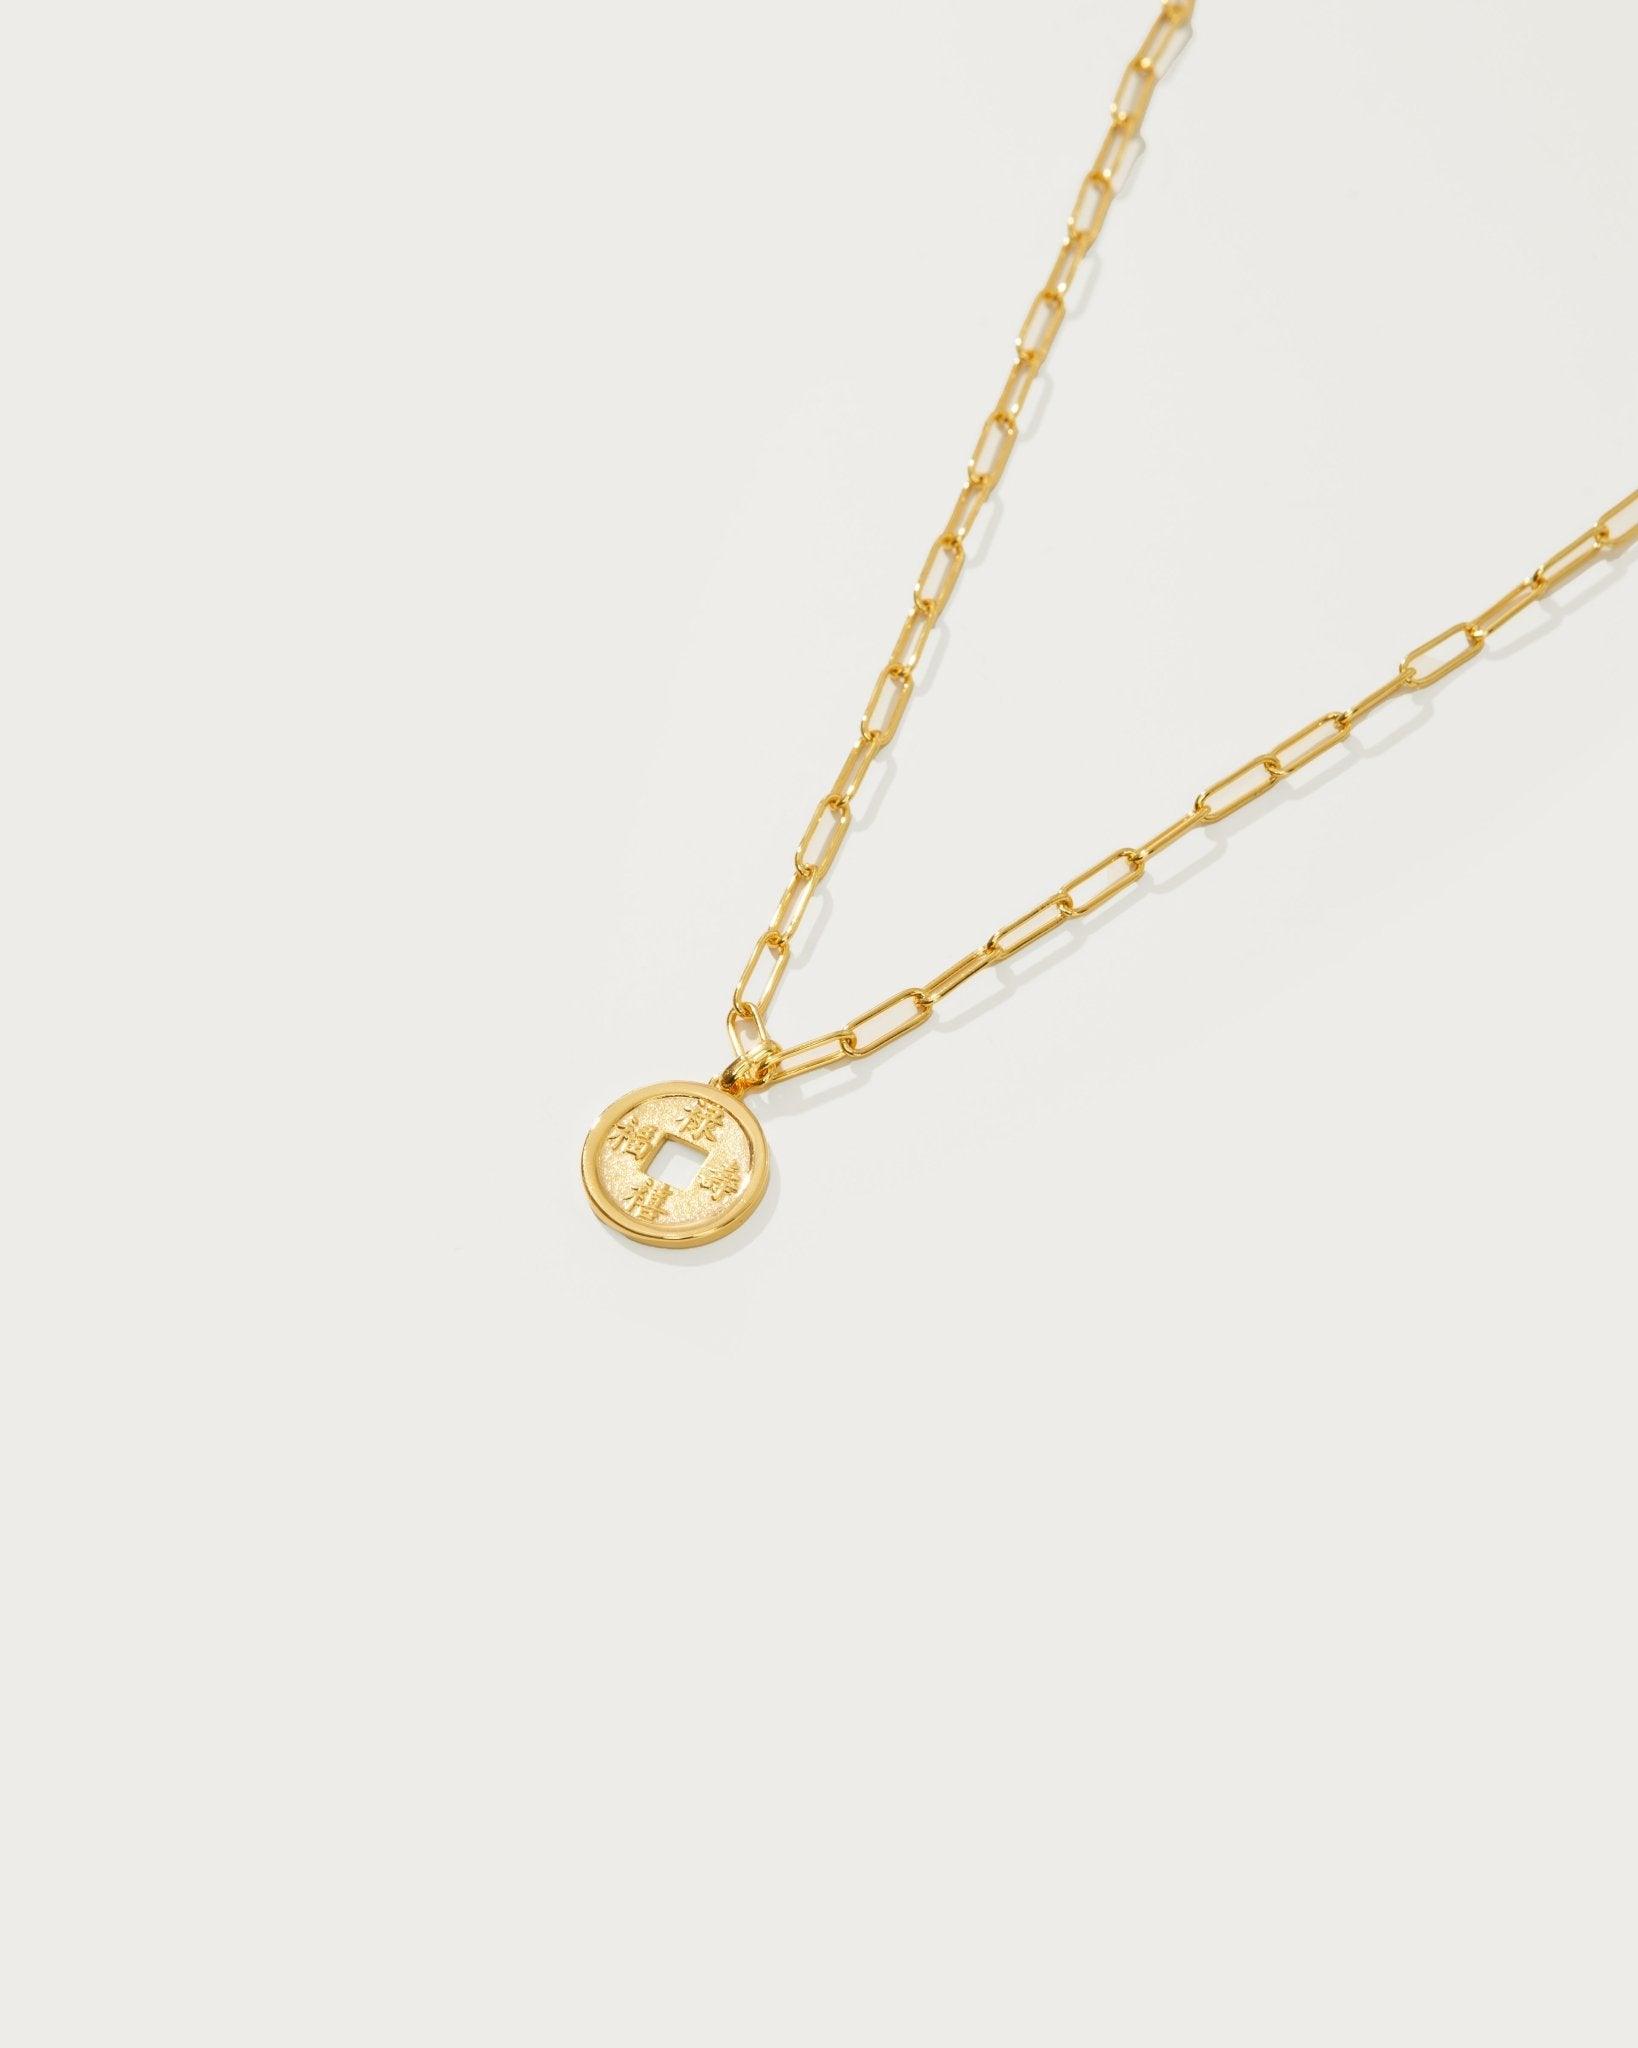 Gold Disc Necklace - En Route Jewelry